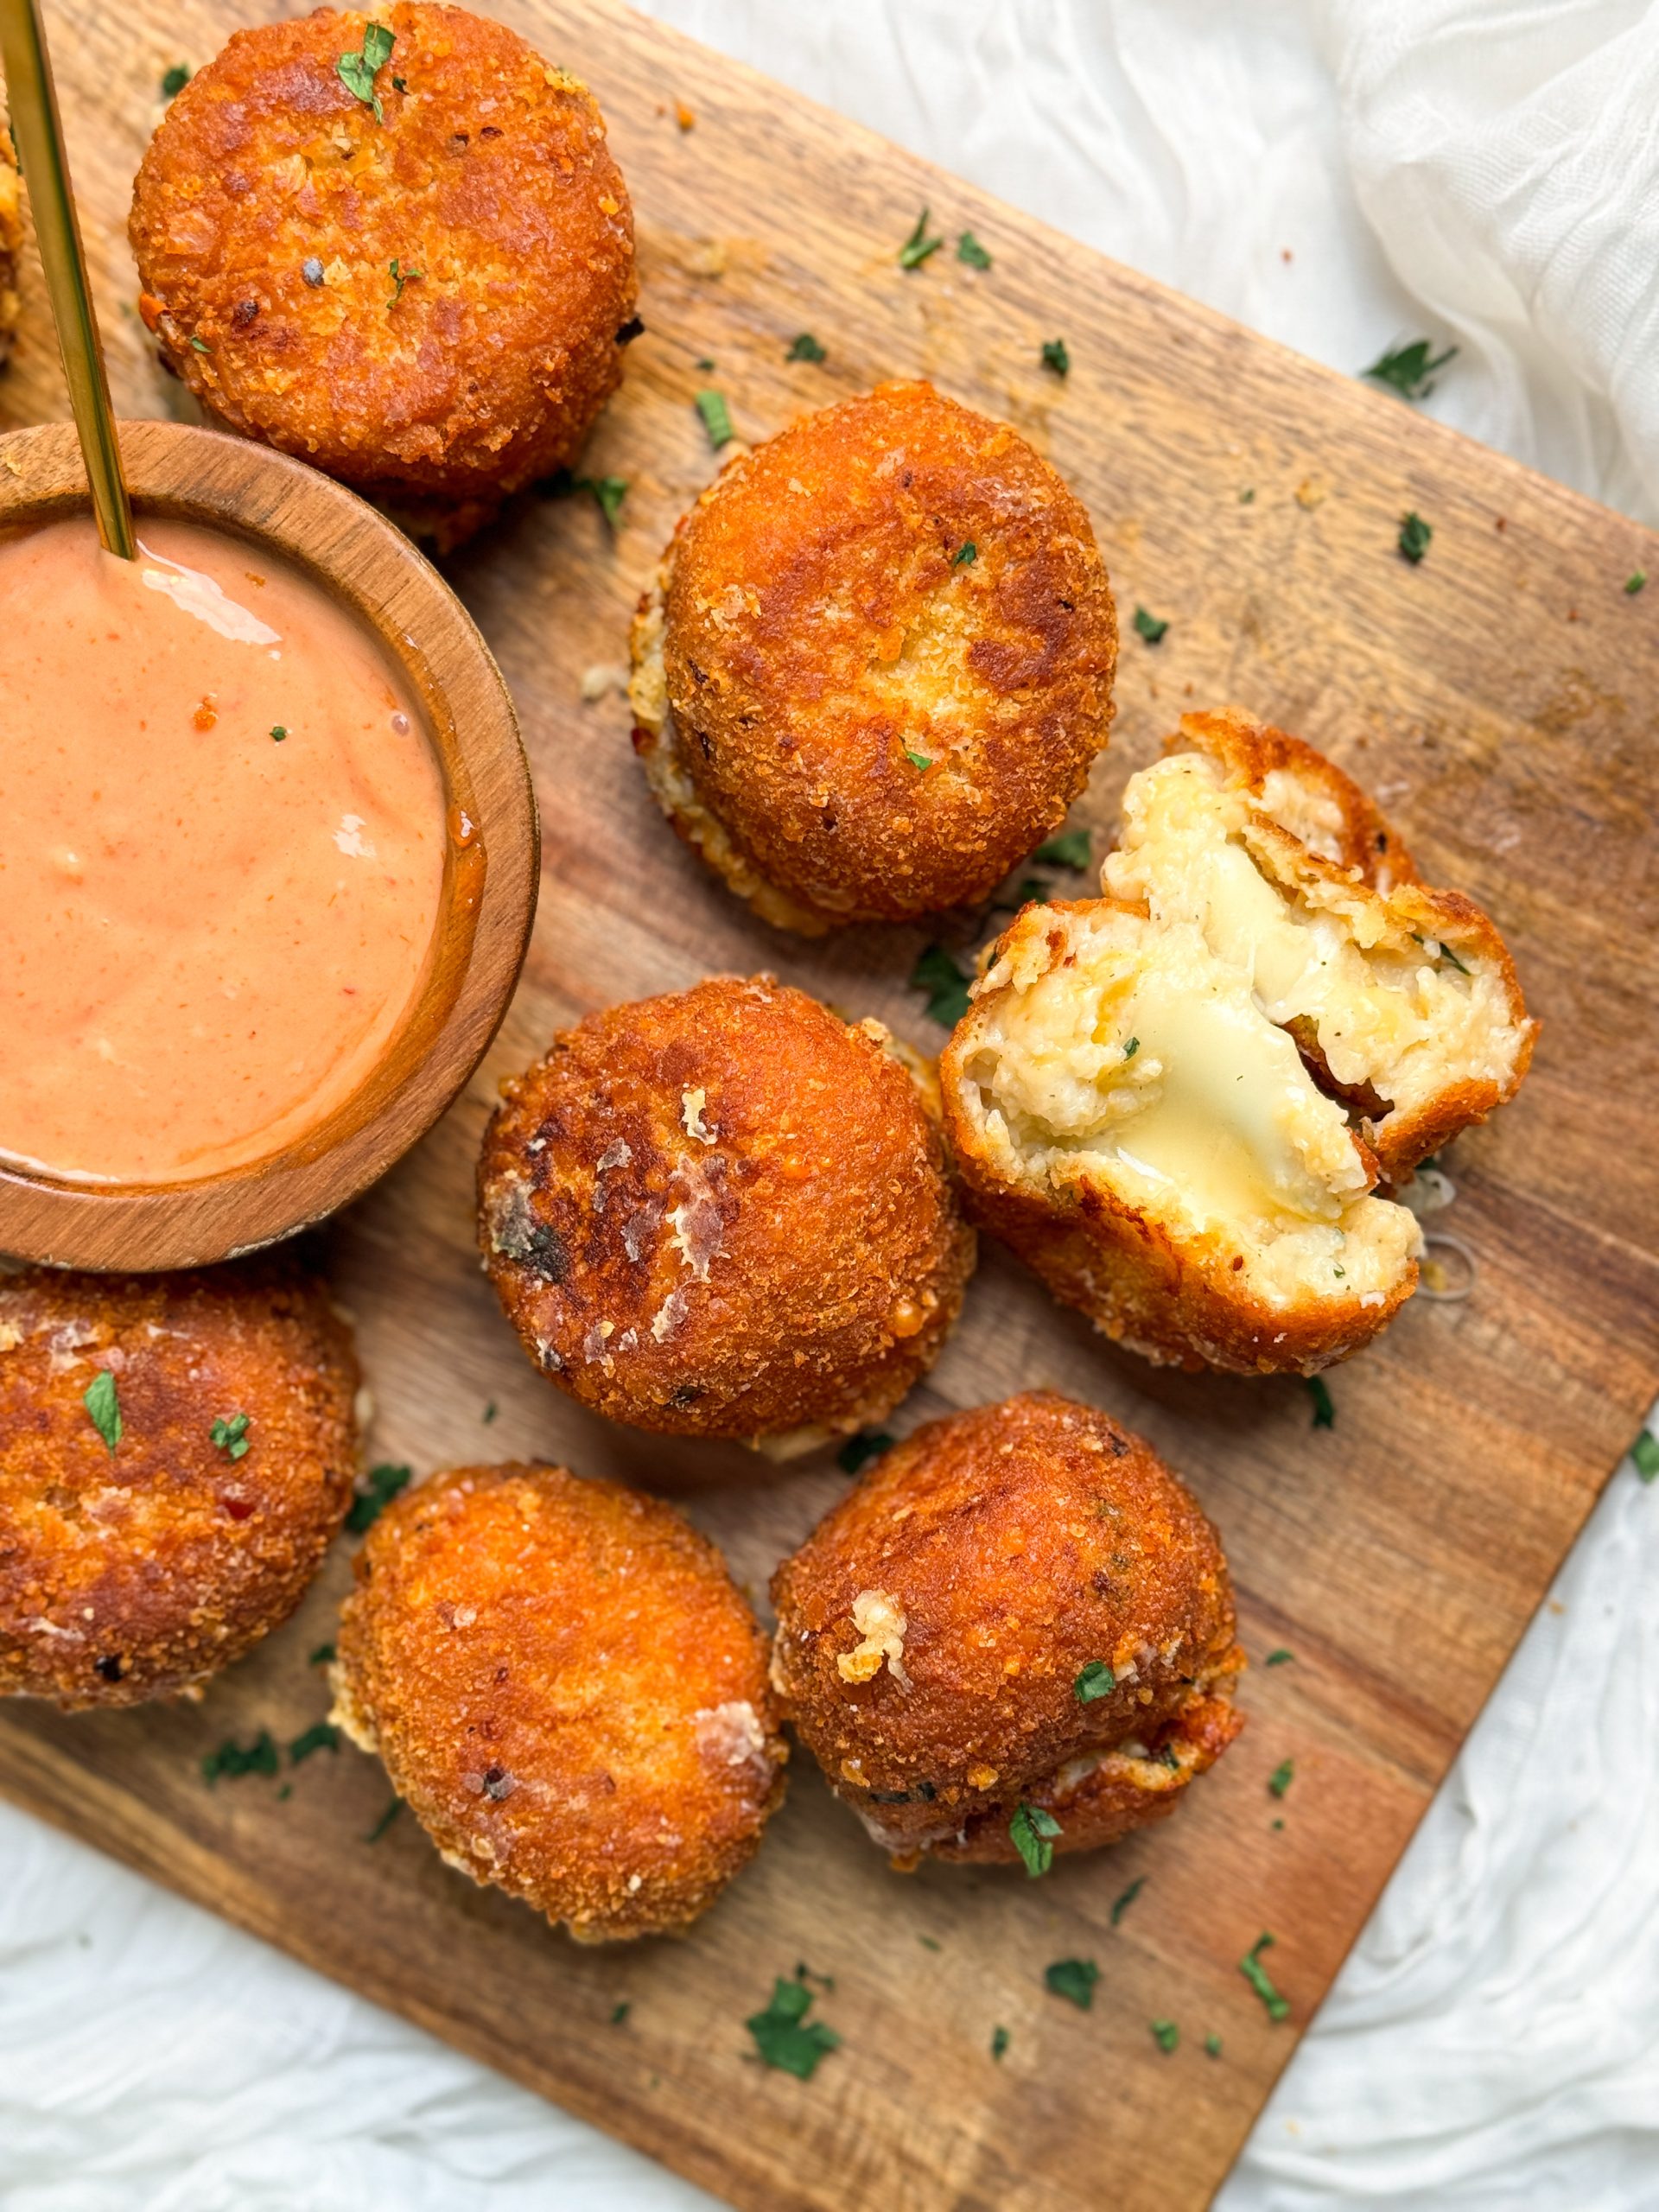 crispy fried mashed potato balls on a cutting board, one ball is broken in half to show soft cheesy middle. balls are golden brown and crispy. small bowl with sauce on the side